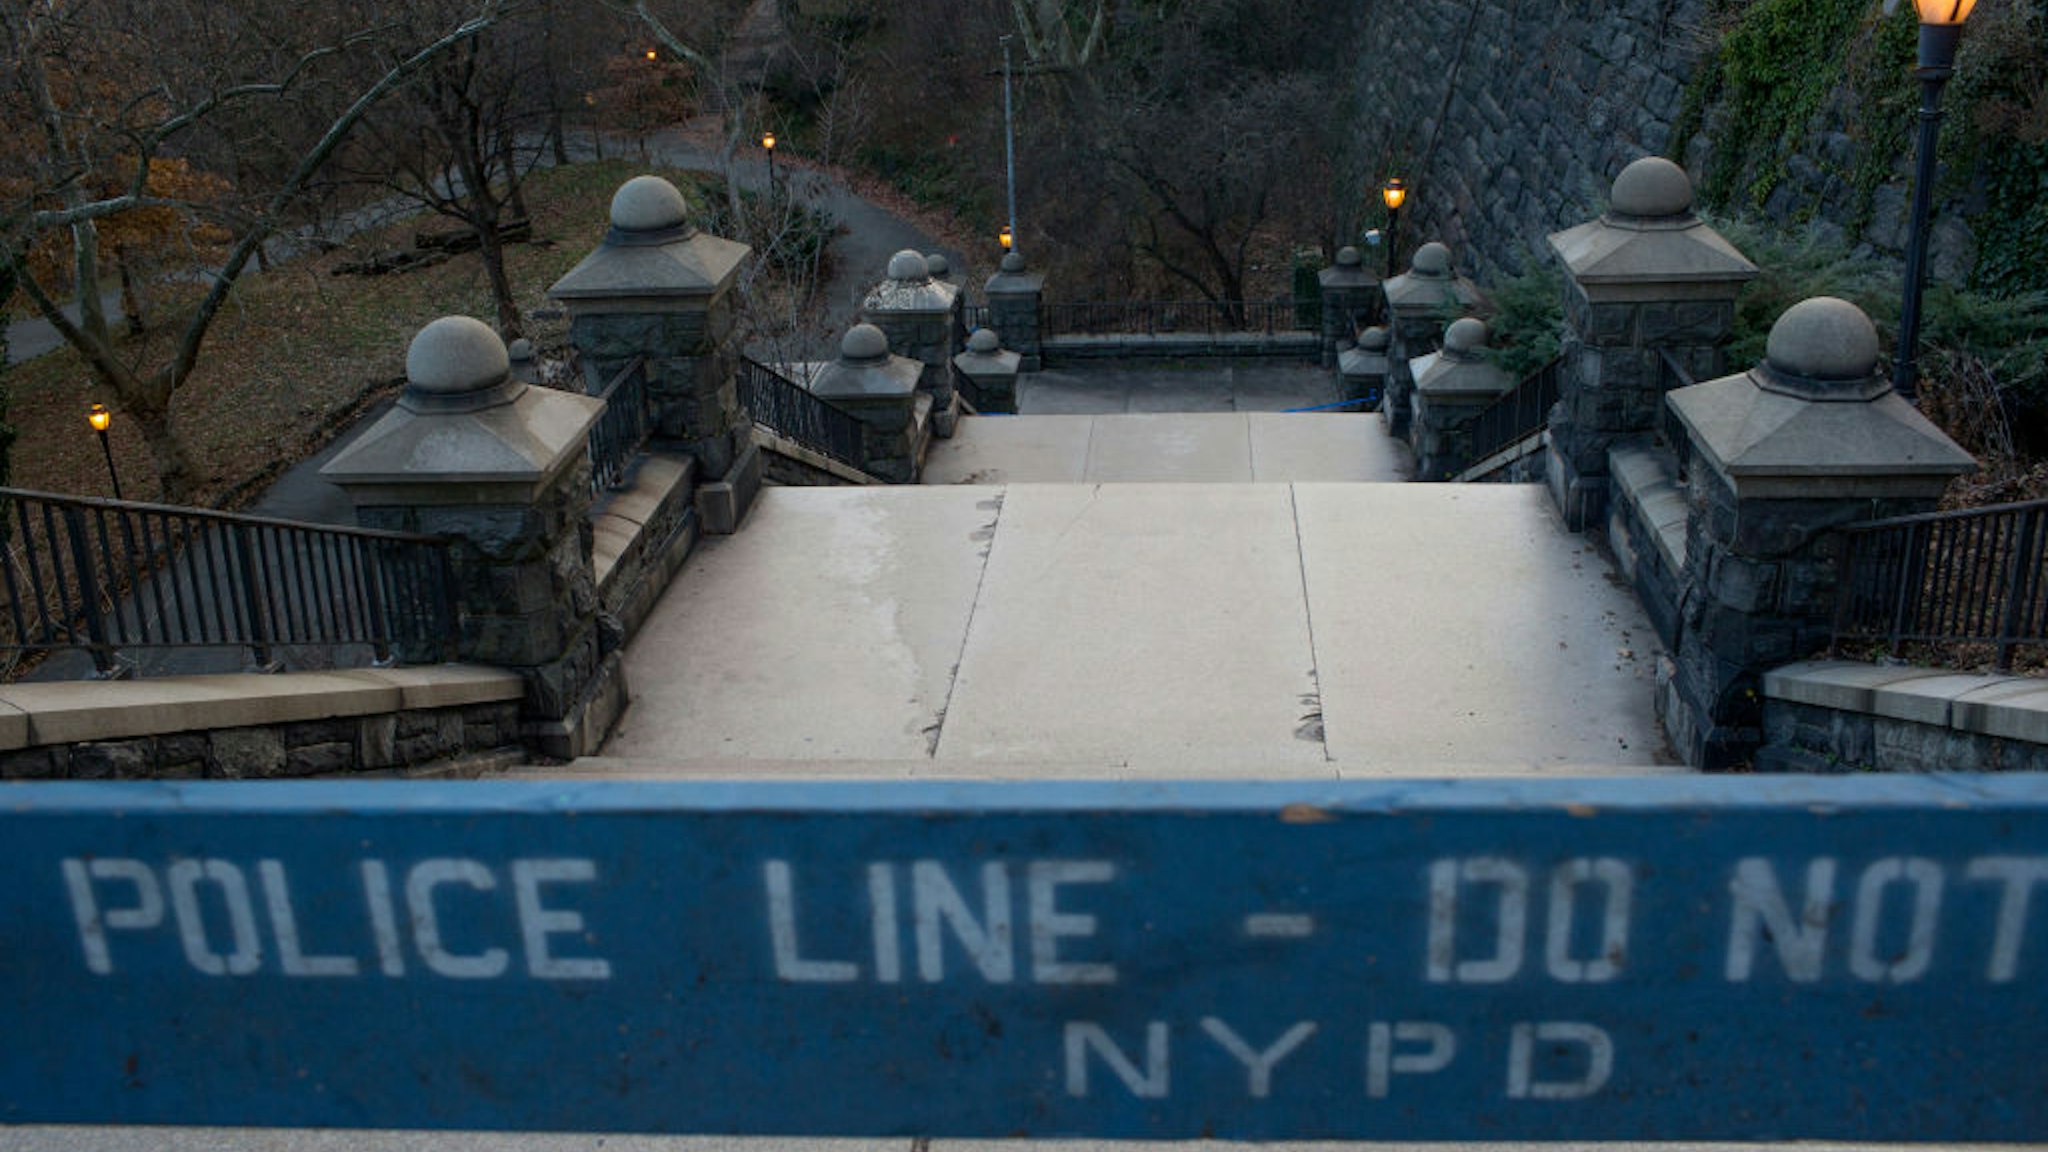 Views of the crime scene in Morningside Park four days after Tessa Majors, a Barnard freshman, was murdered, as seen on December 15, 2019 in New York City.